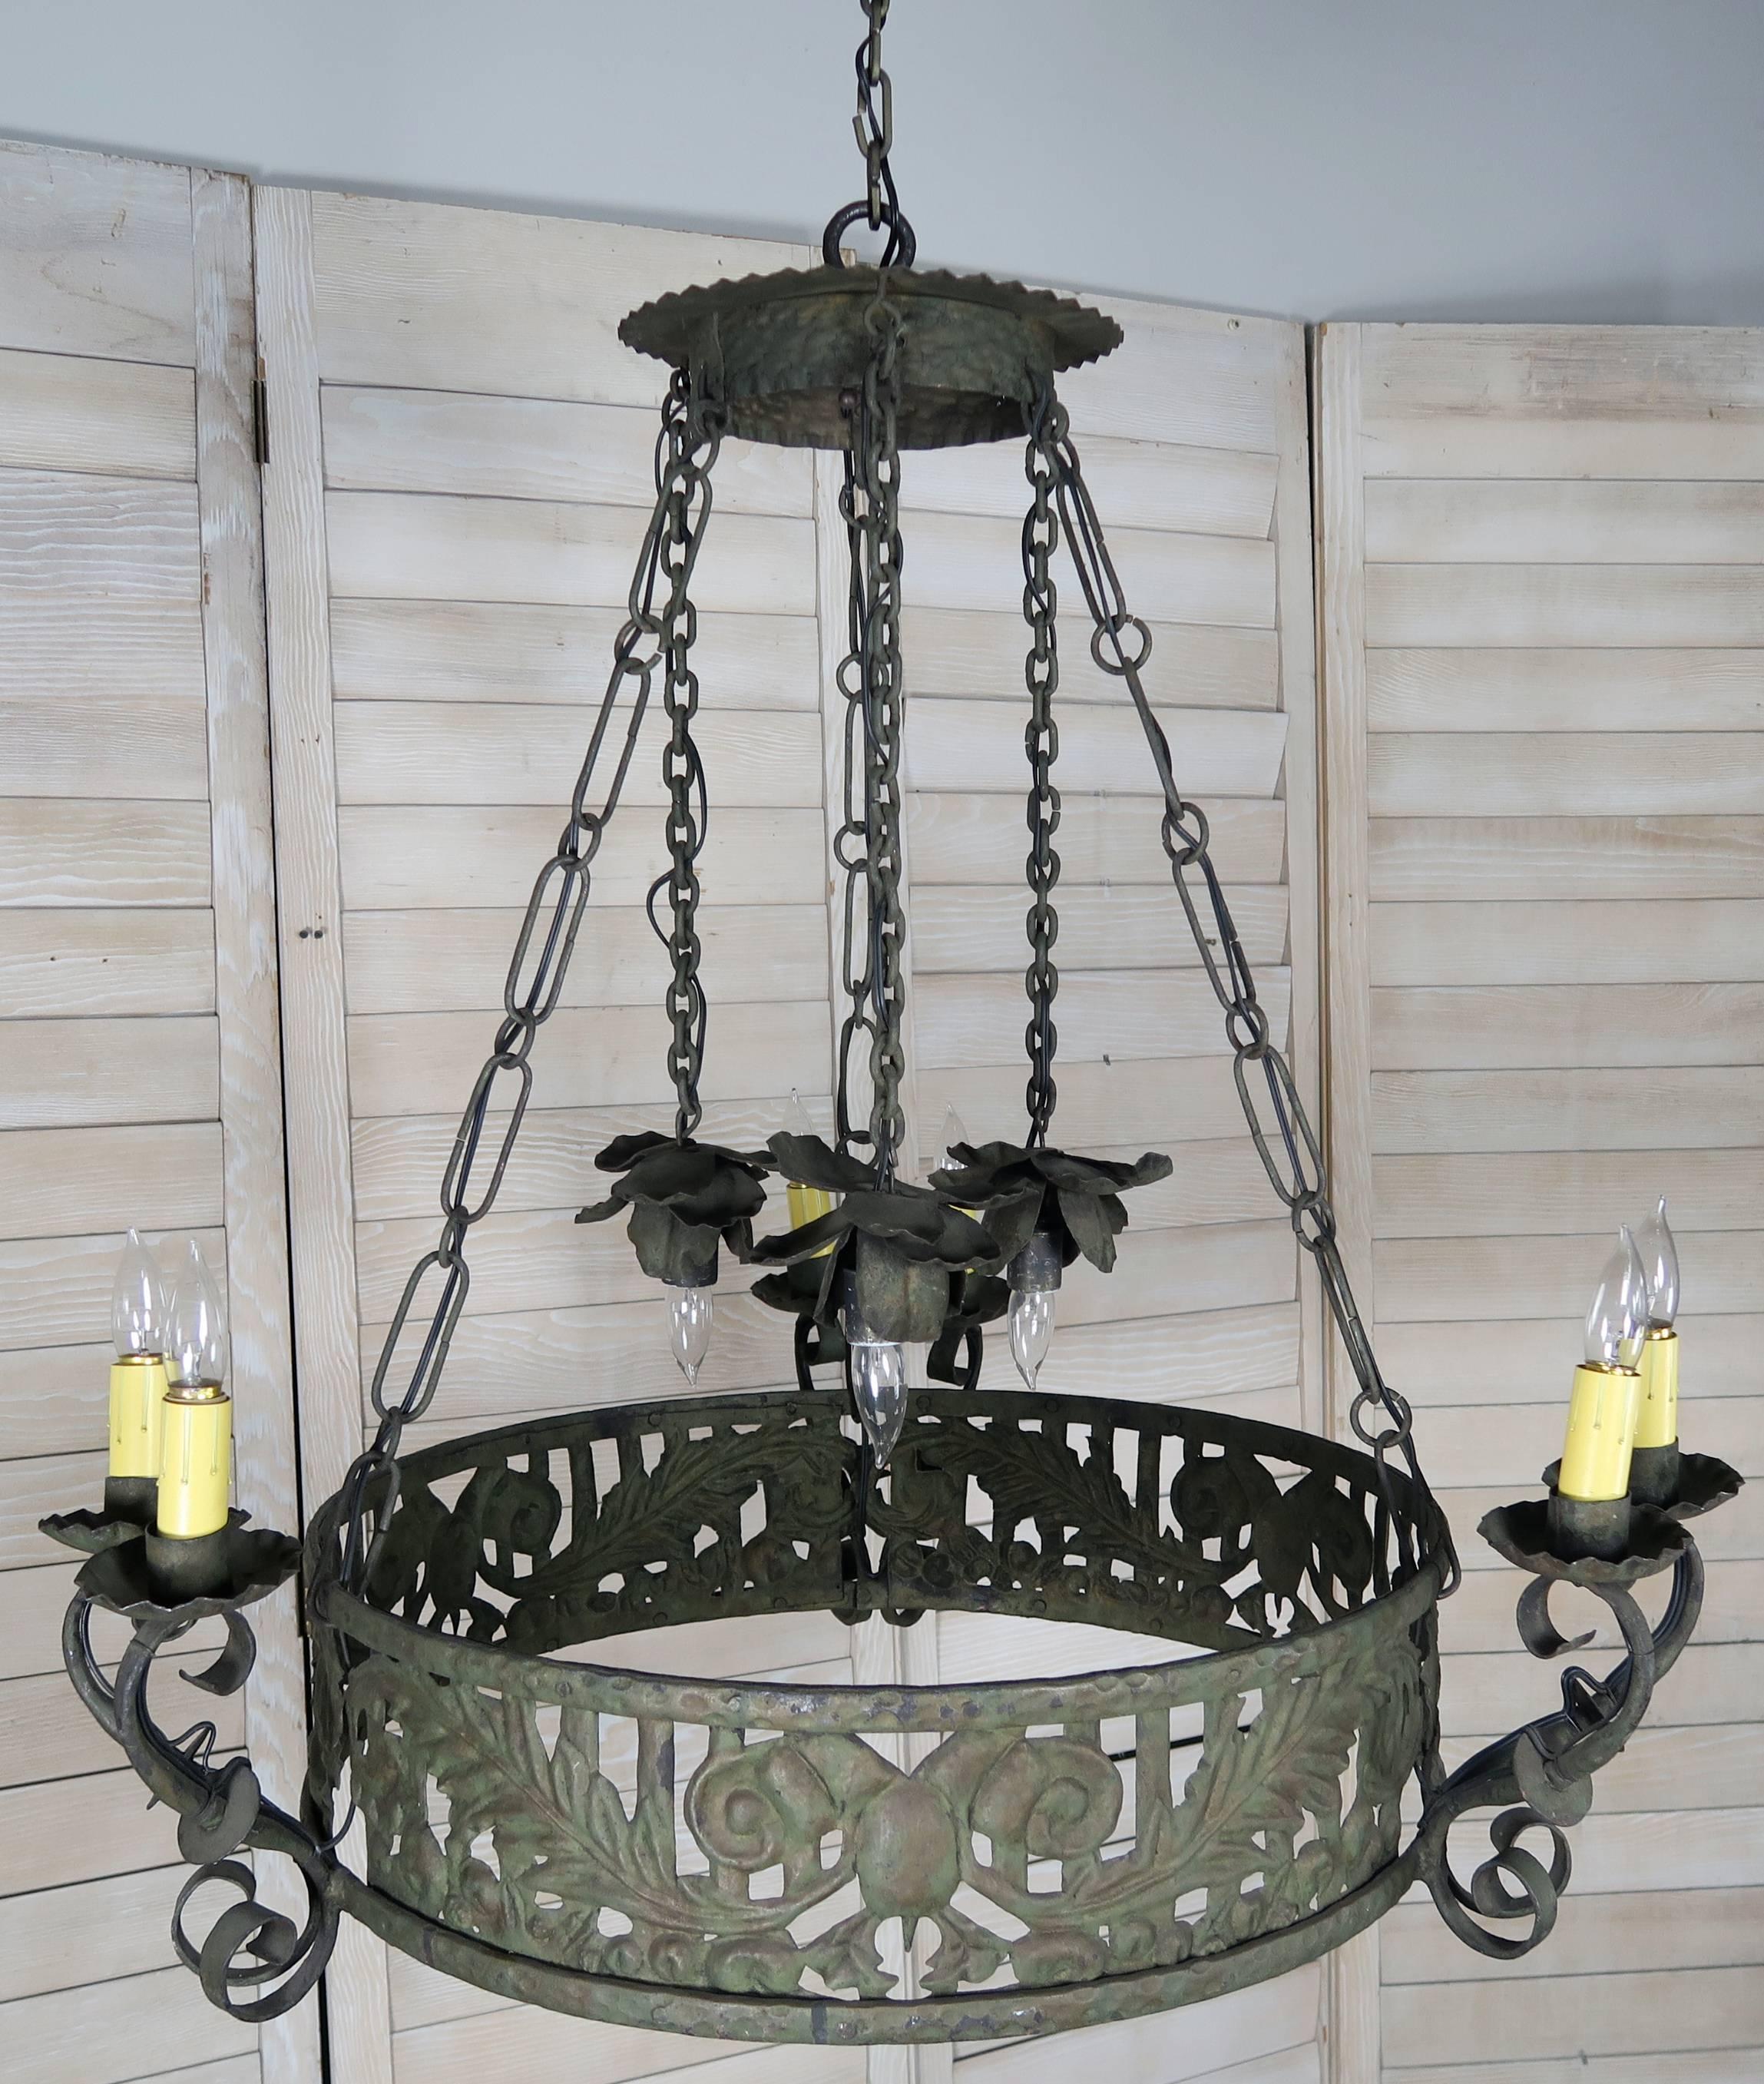 19th century Spanish wrought iron circular chandelier. Six lights in three pairs of two with drip wax candle covers held by scroll shaped arms. Three lights suspended from the canopy by wrought iron chains support three large wrought iron petaled